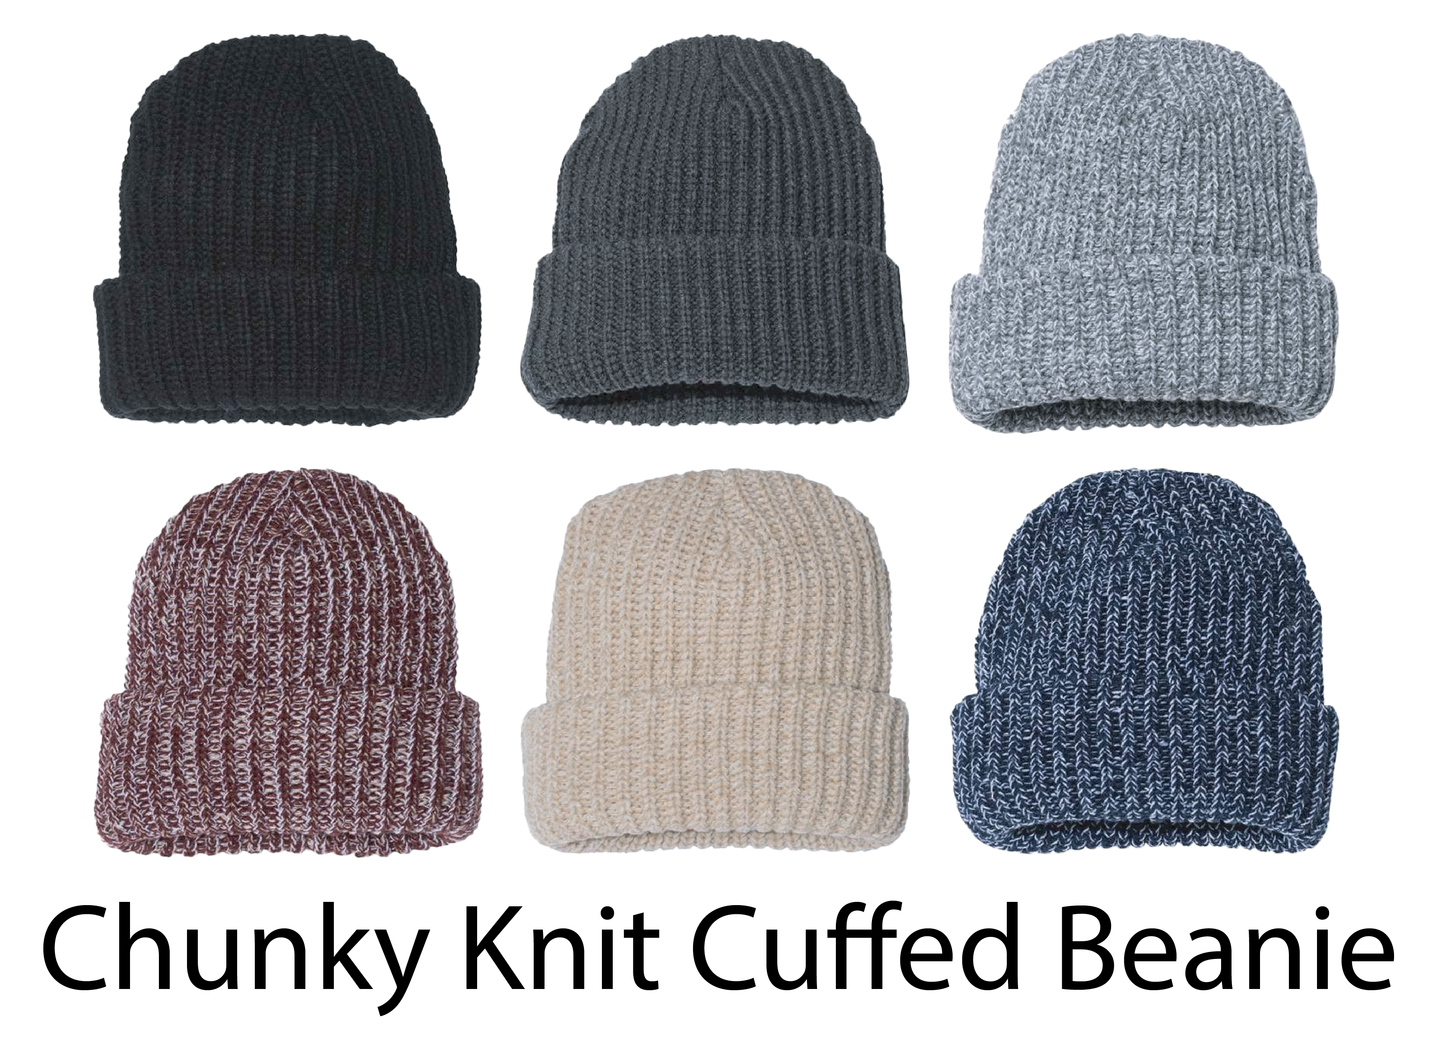 Twisted 7 Hat or Beanie - Available in Multiple Colors & Styles